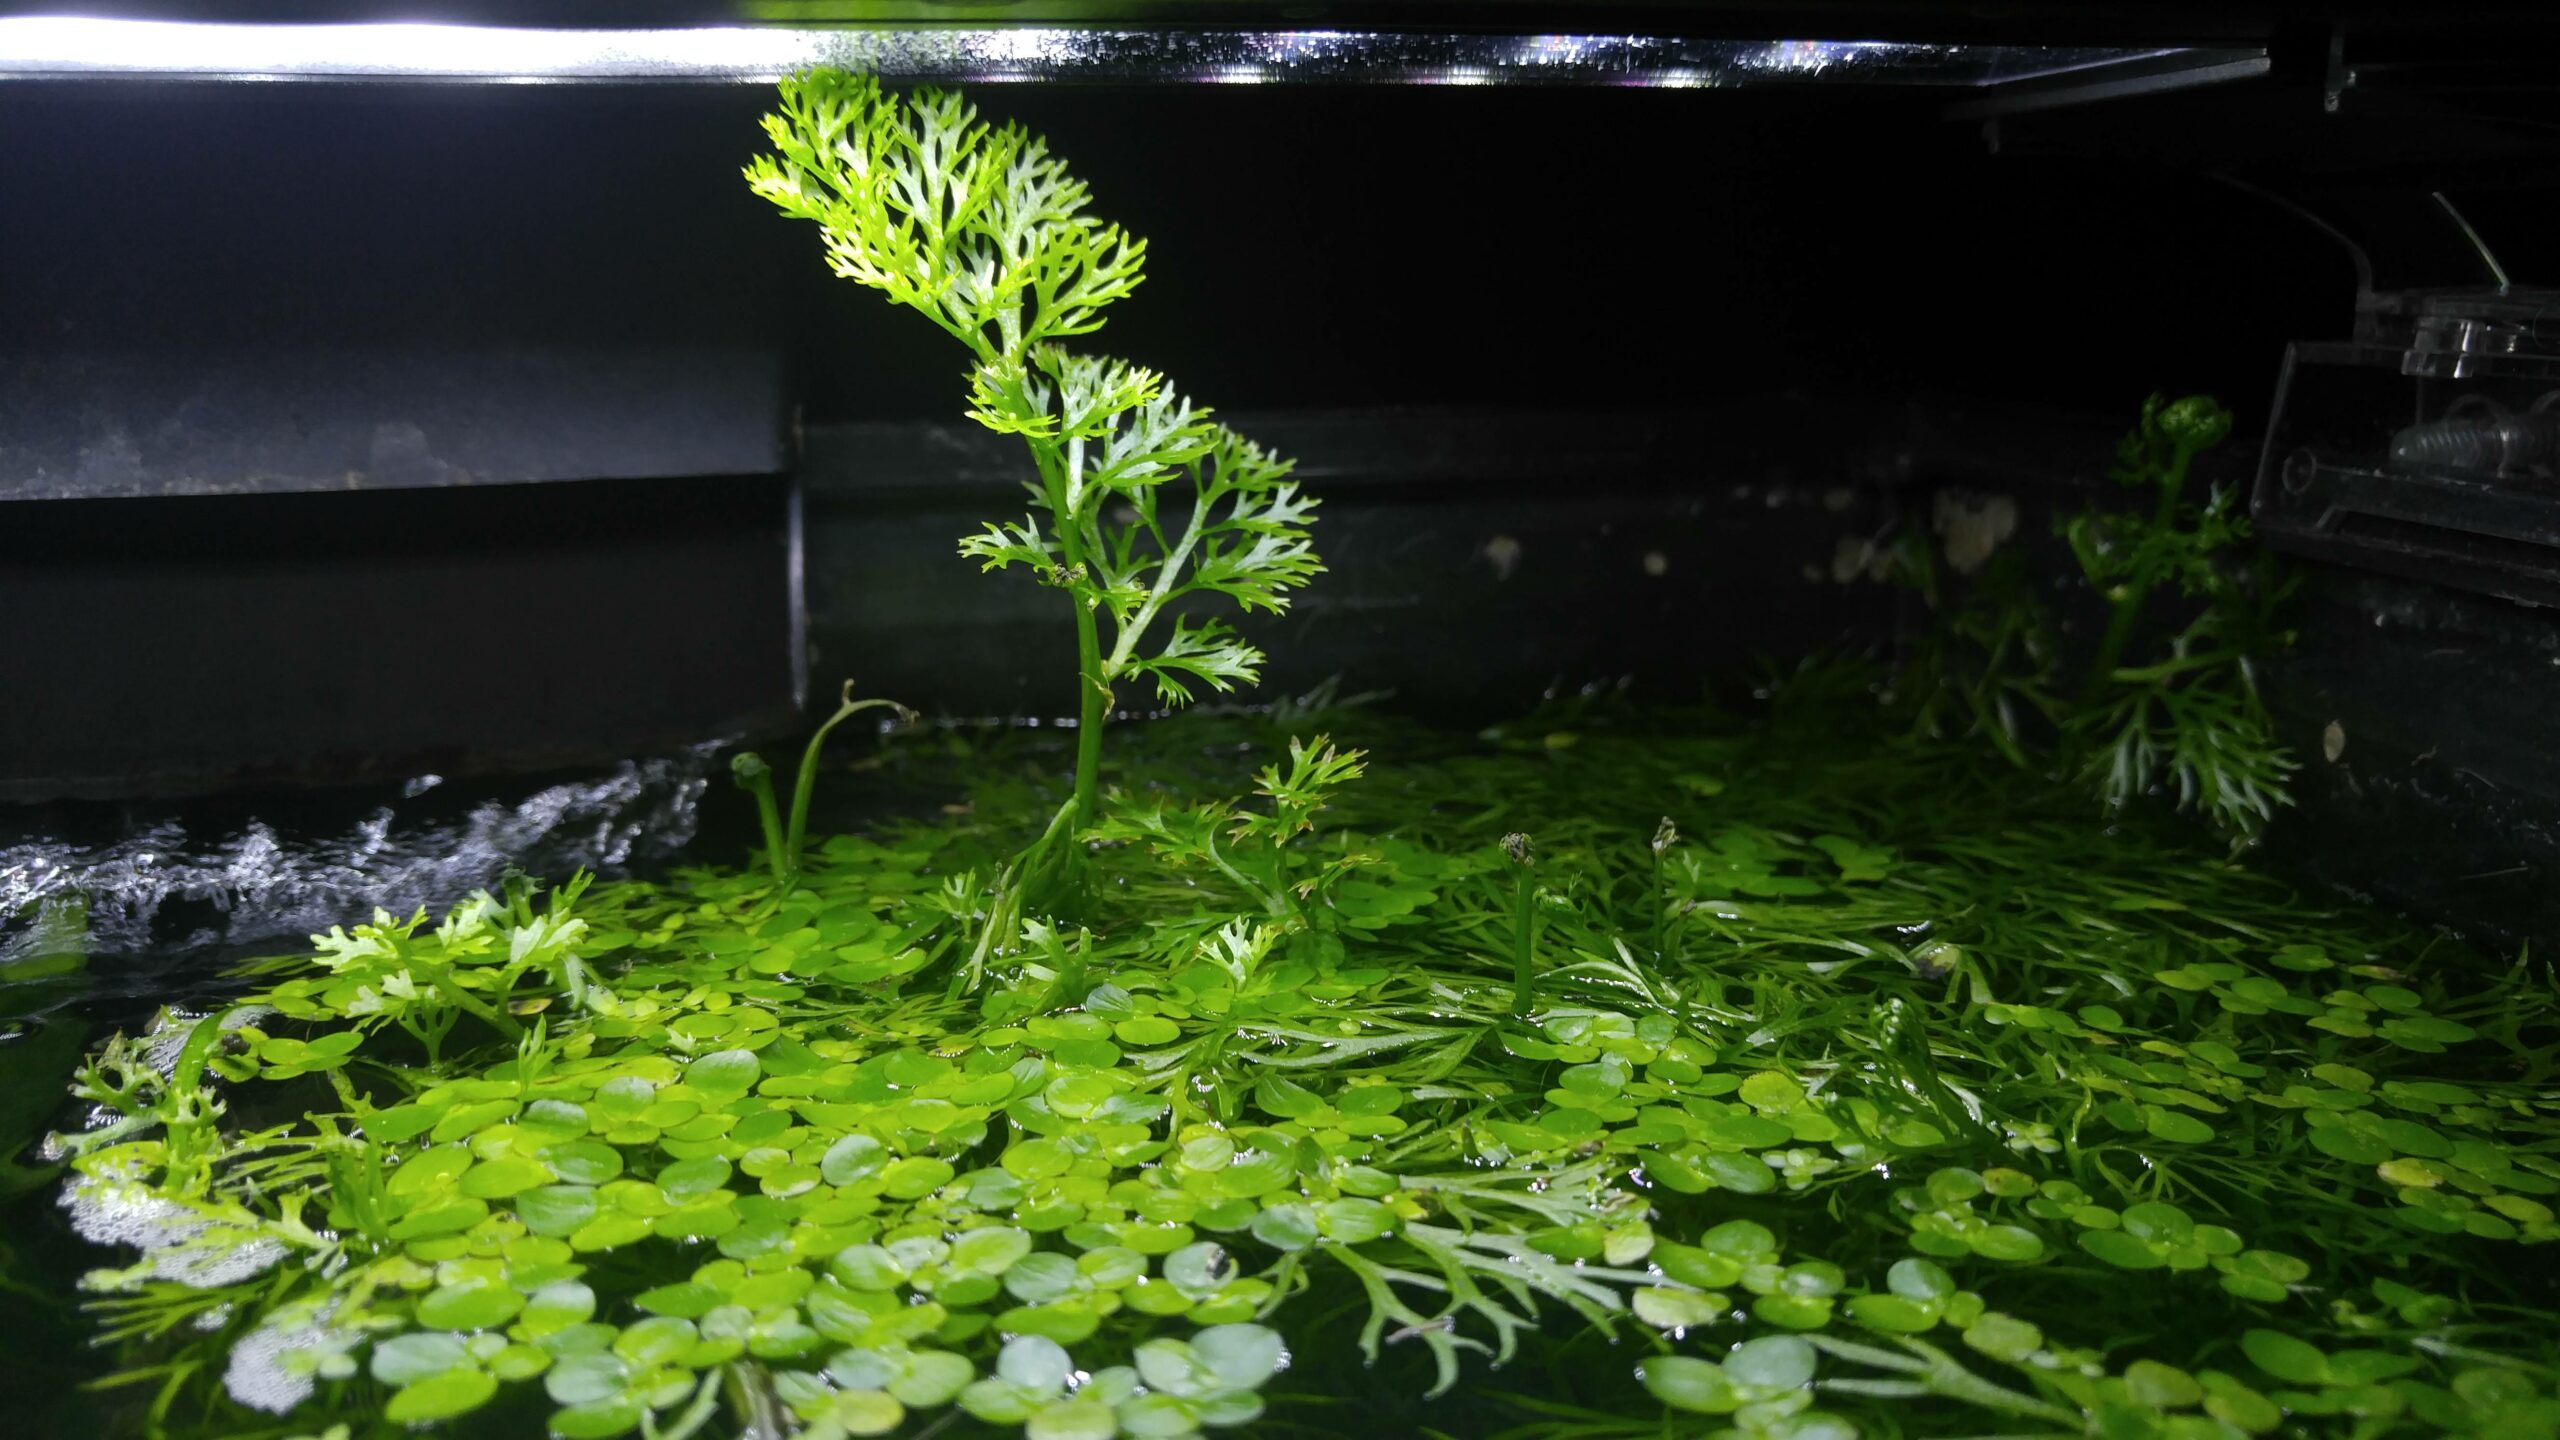 Planted water sprite growing out of an aquarium.